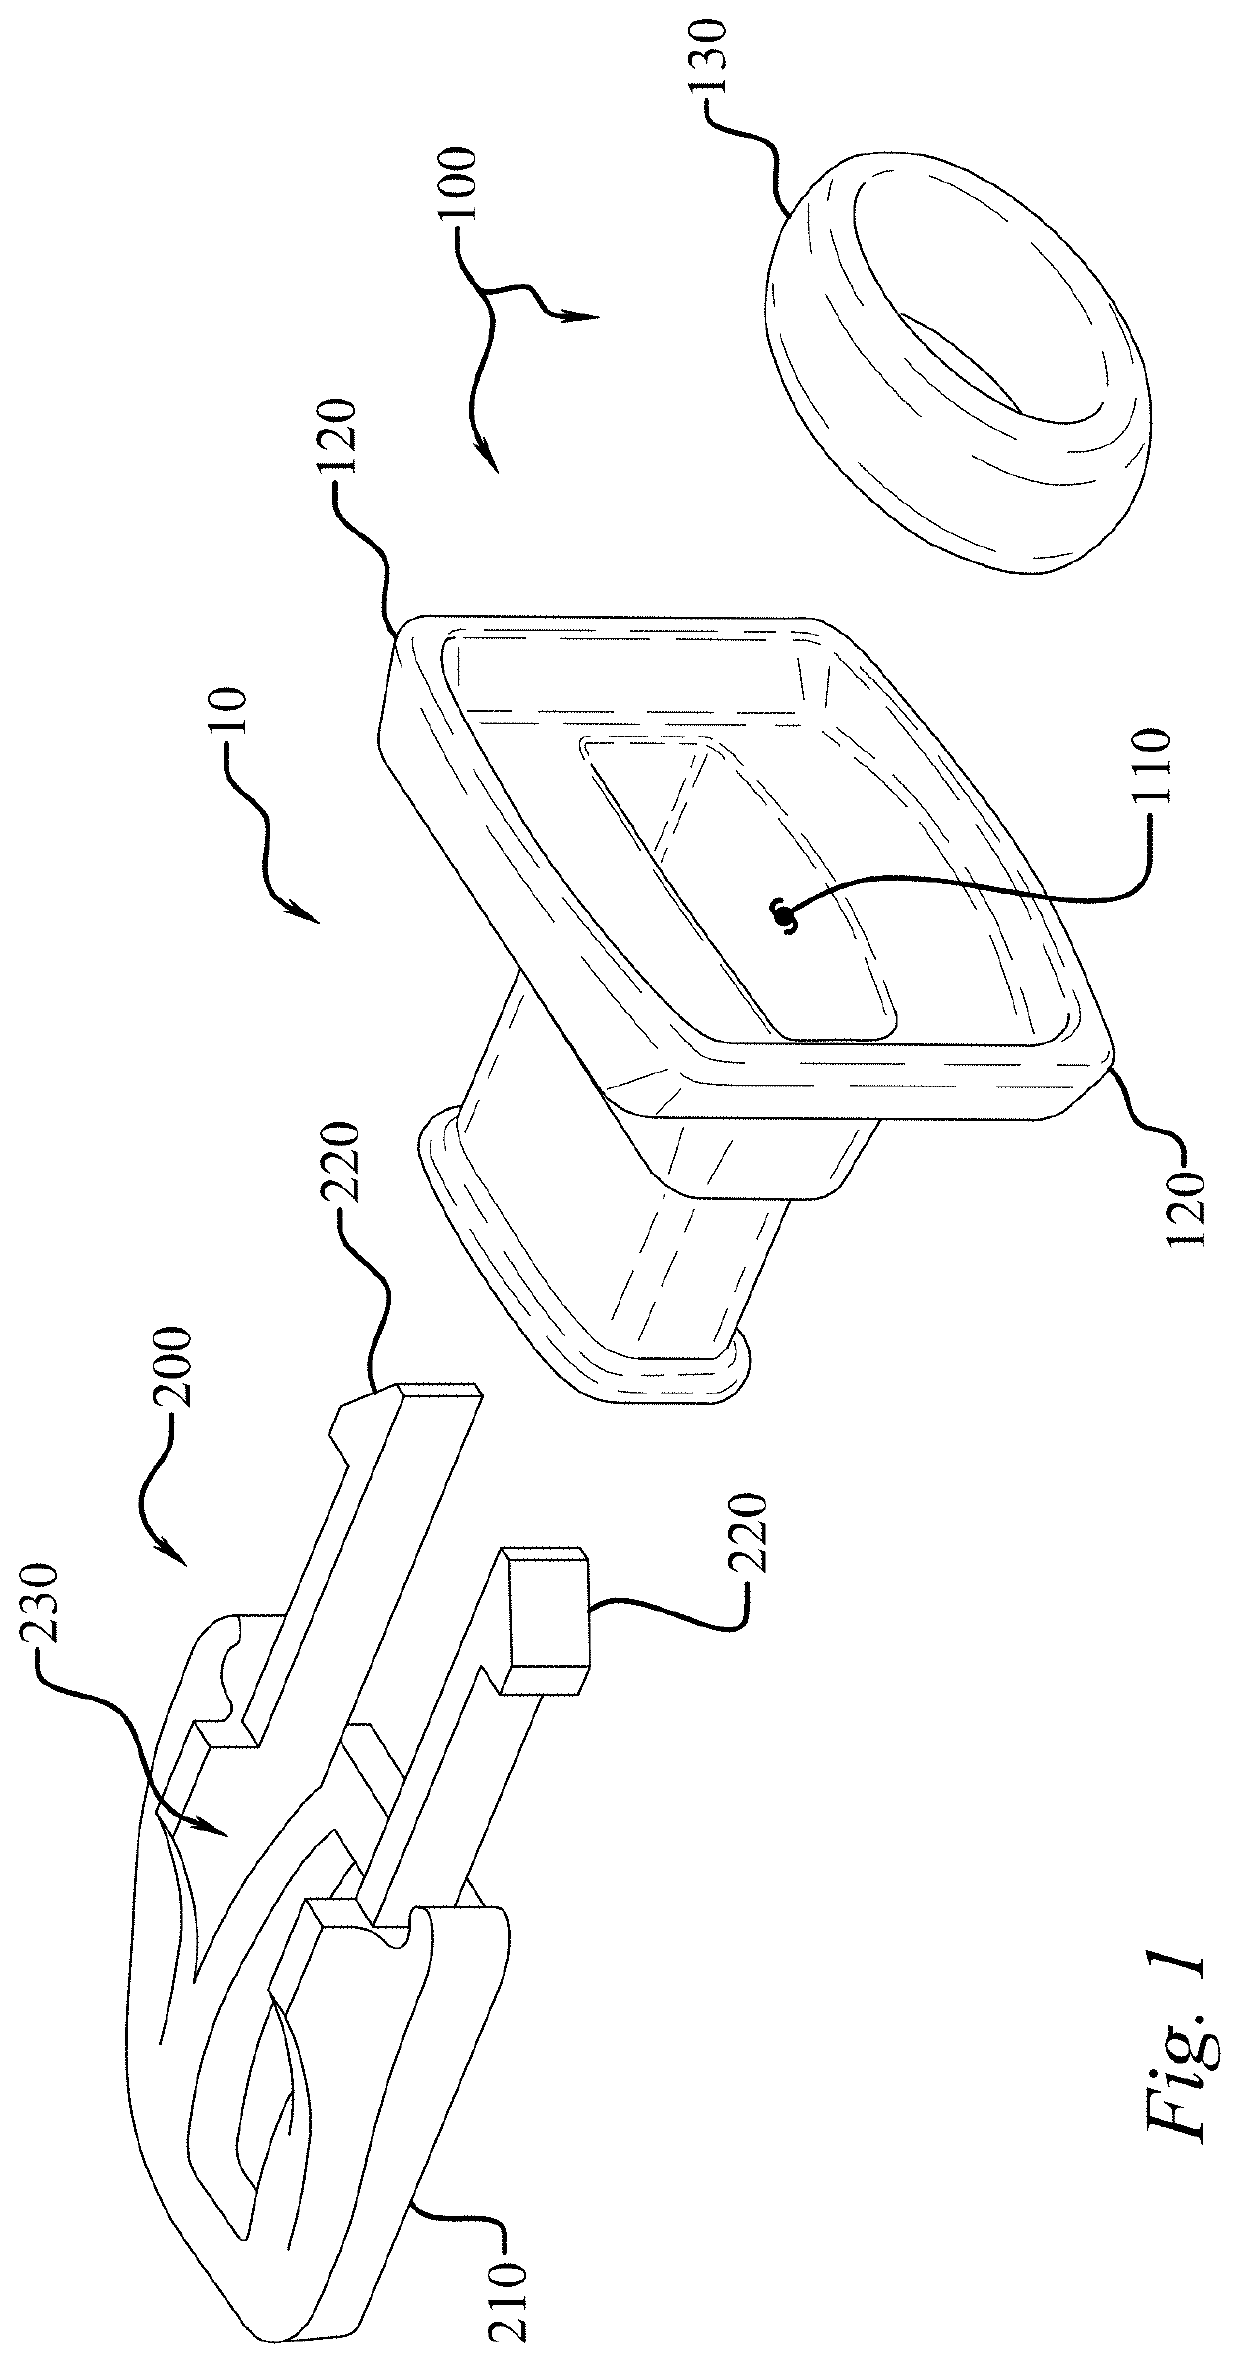 Immobilization system having bite-block stabilization and method of using same